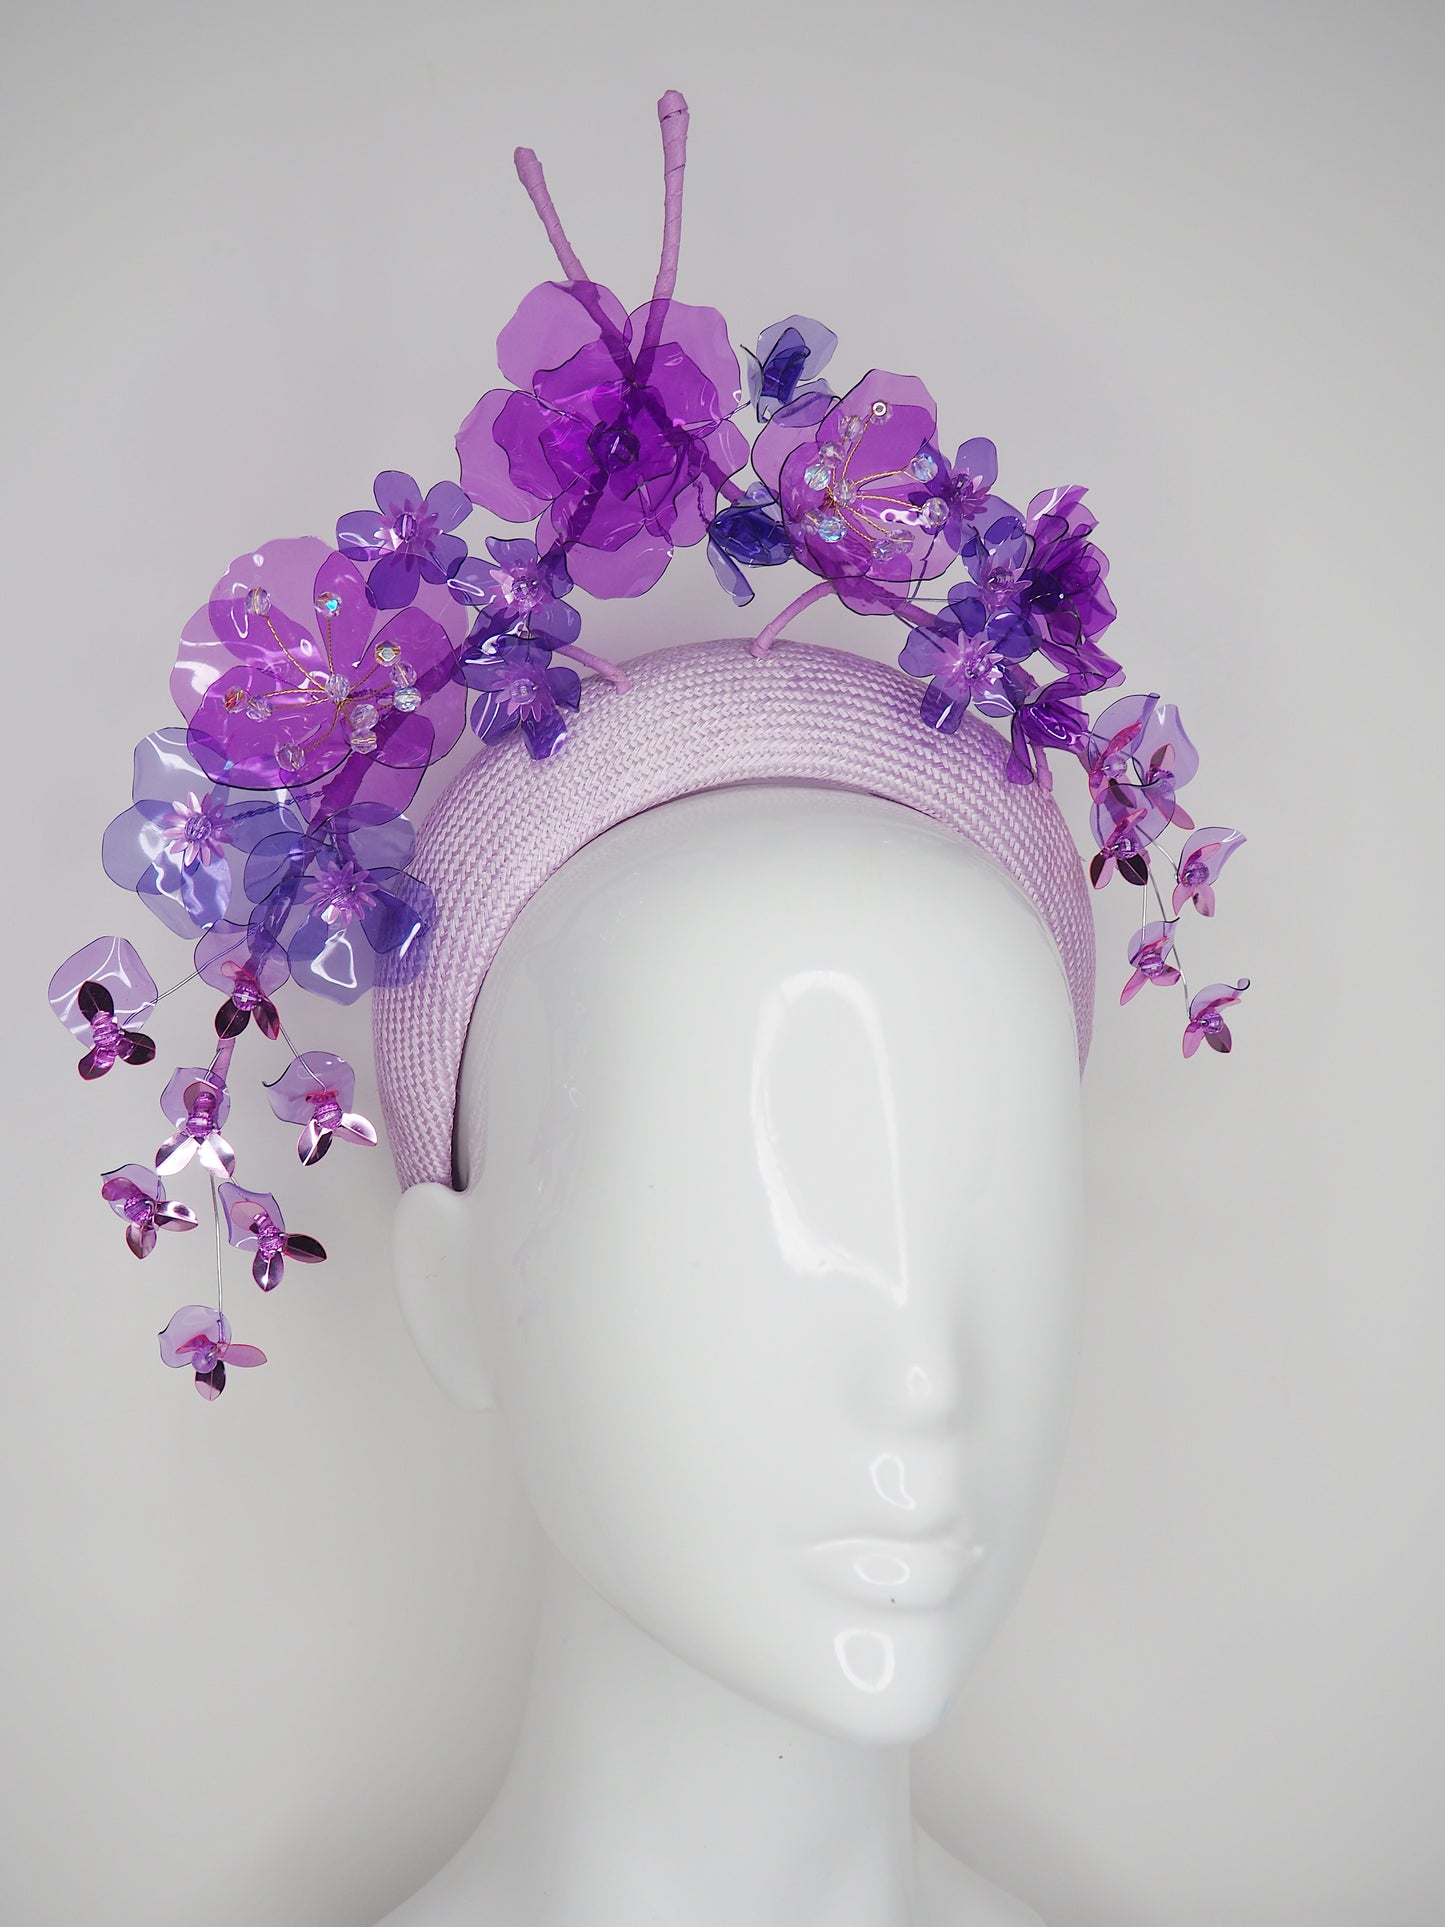 Pretty in Purple - Pastel lilac Parisissal straw 3d headband with cascading blossoms in shades of purple